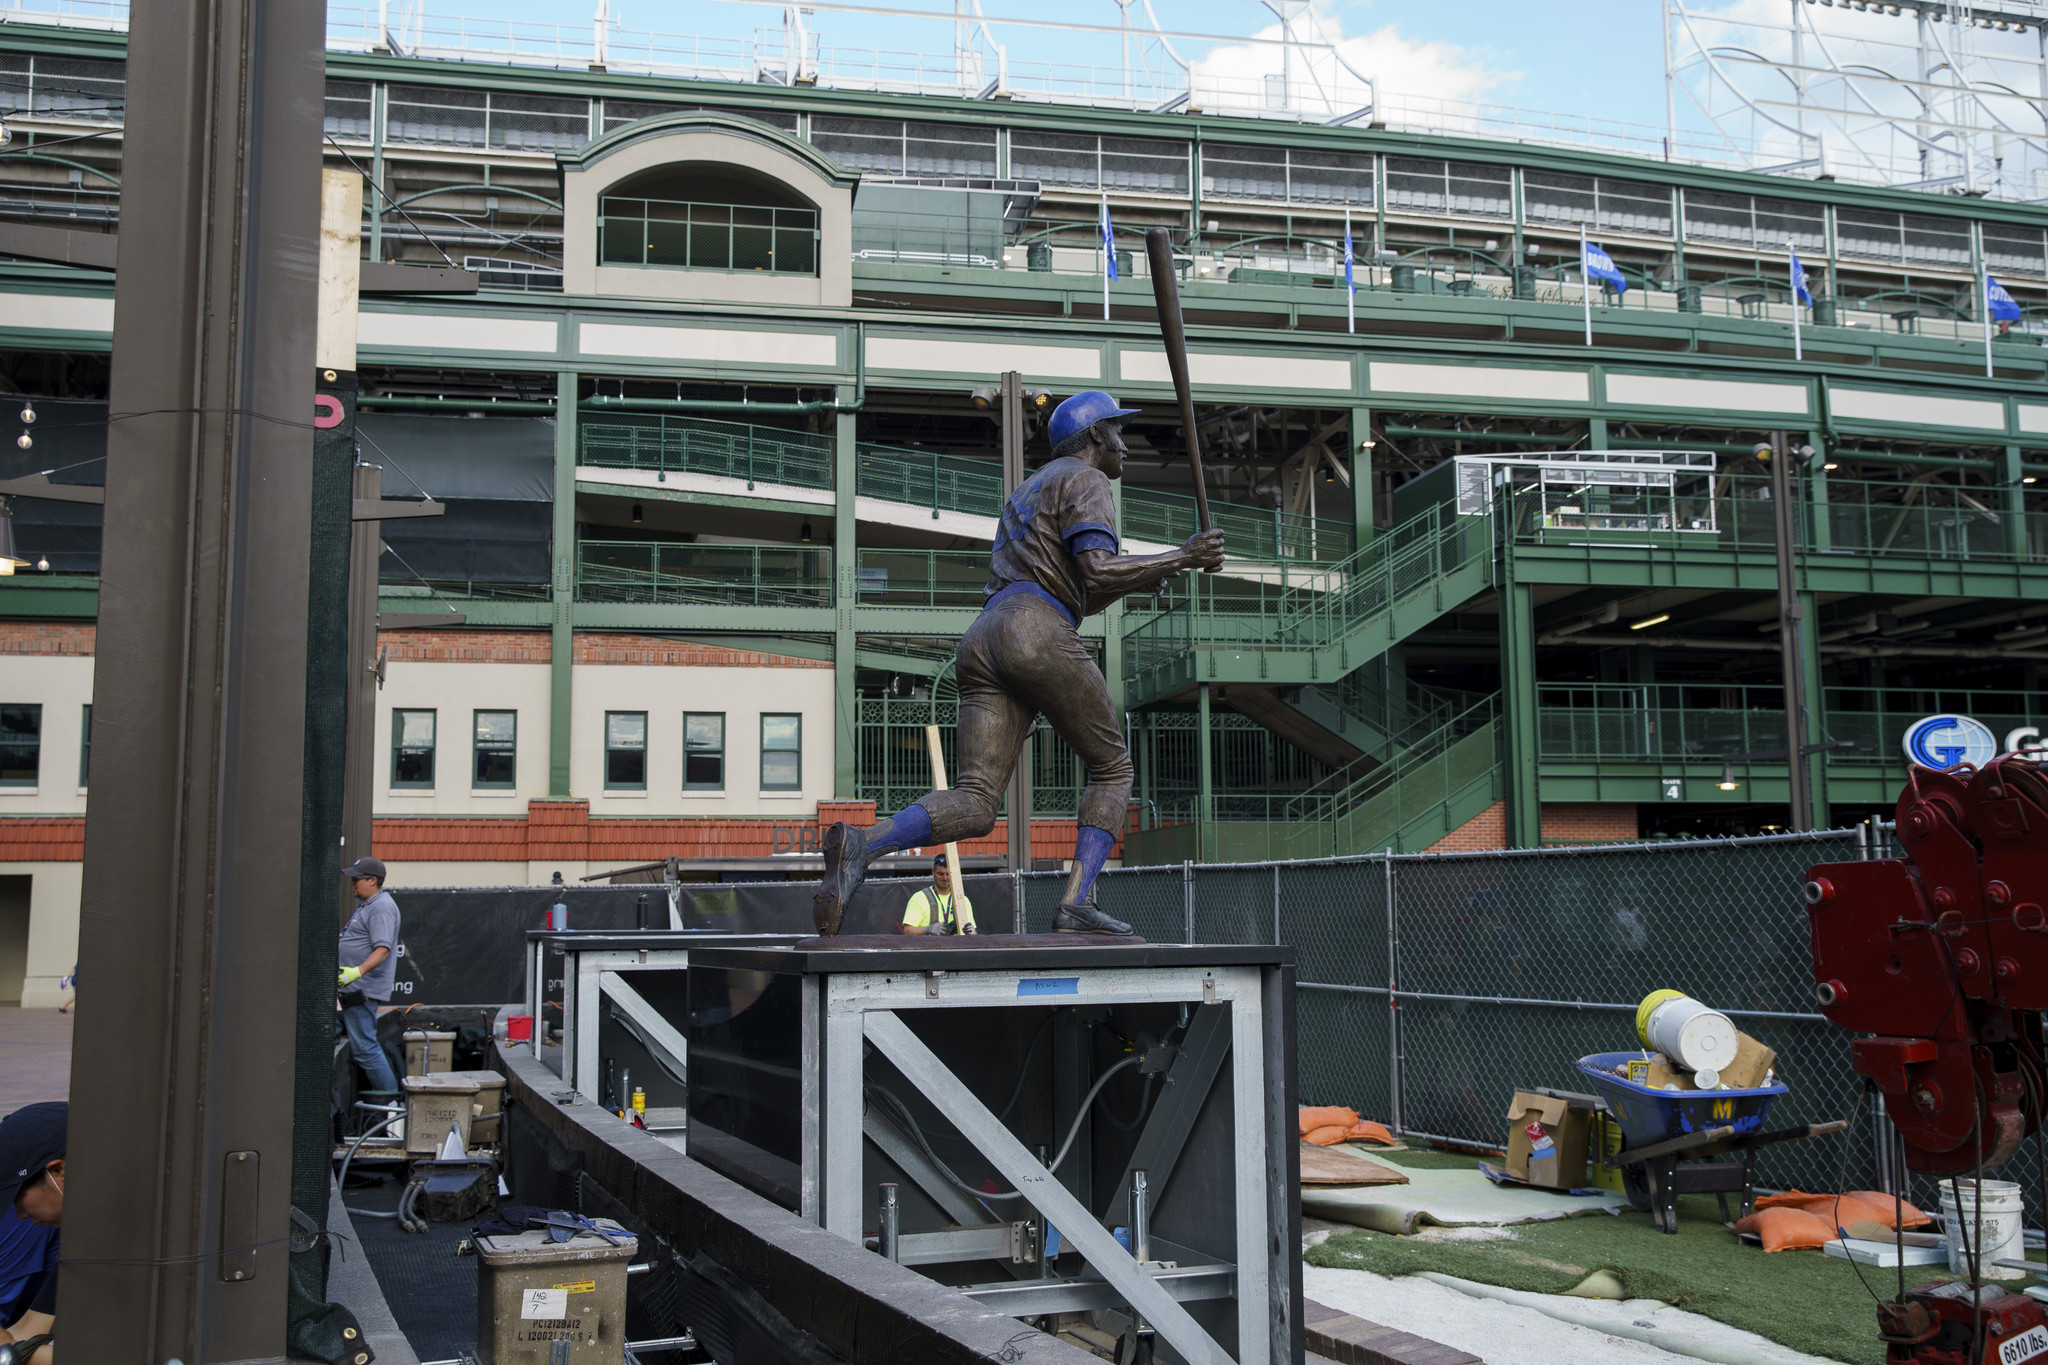 Wrigley Field: What's new in — and around — the historic ballpark